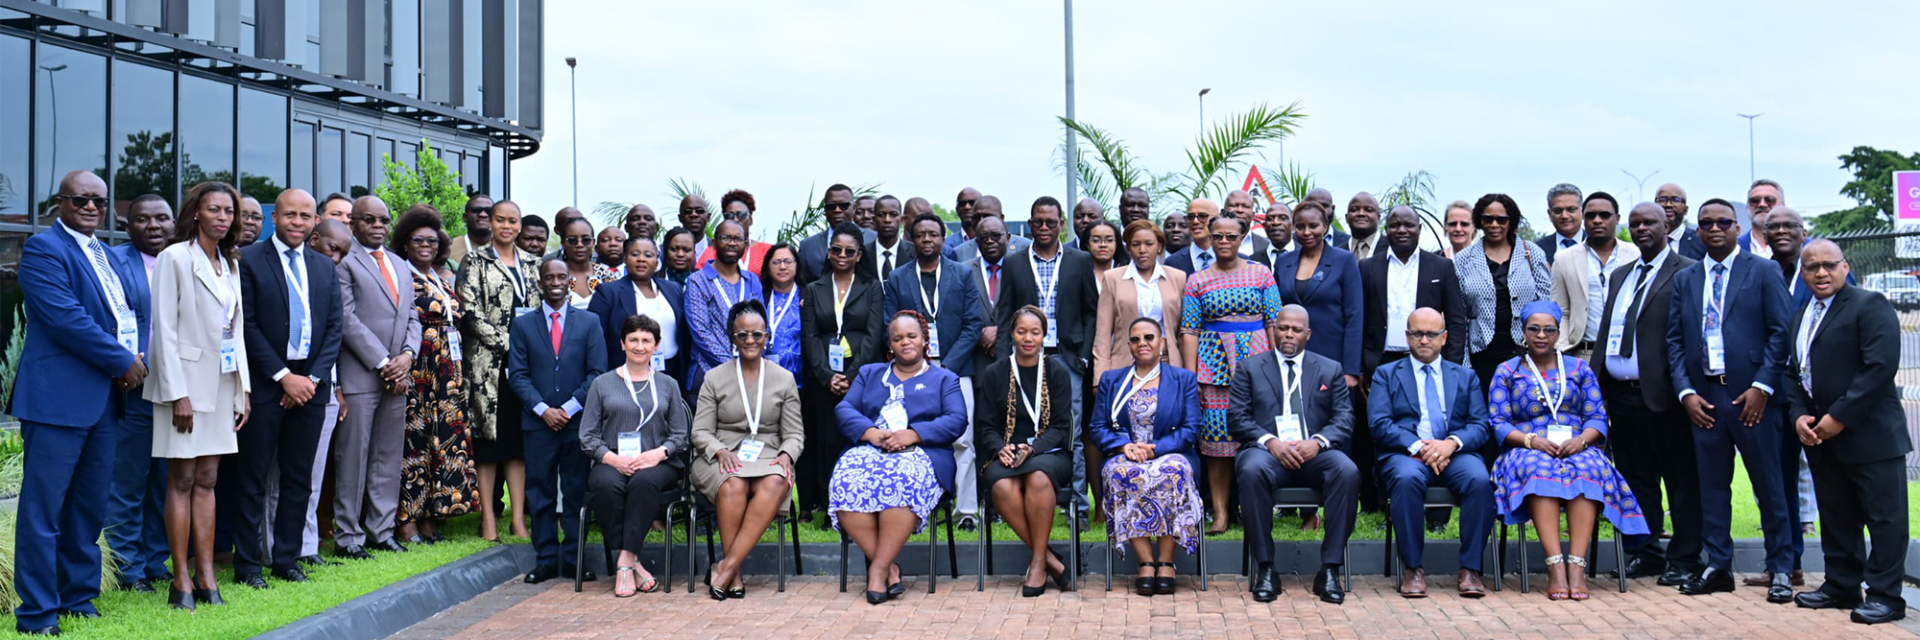 Southern Africa experts call for accelerated action to eradicate poverty, inequality and boost intra-Africa trade